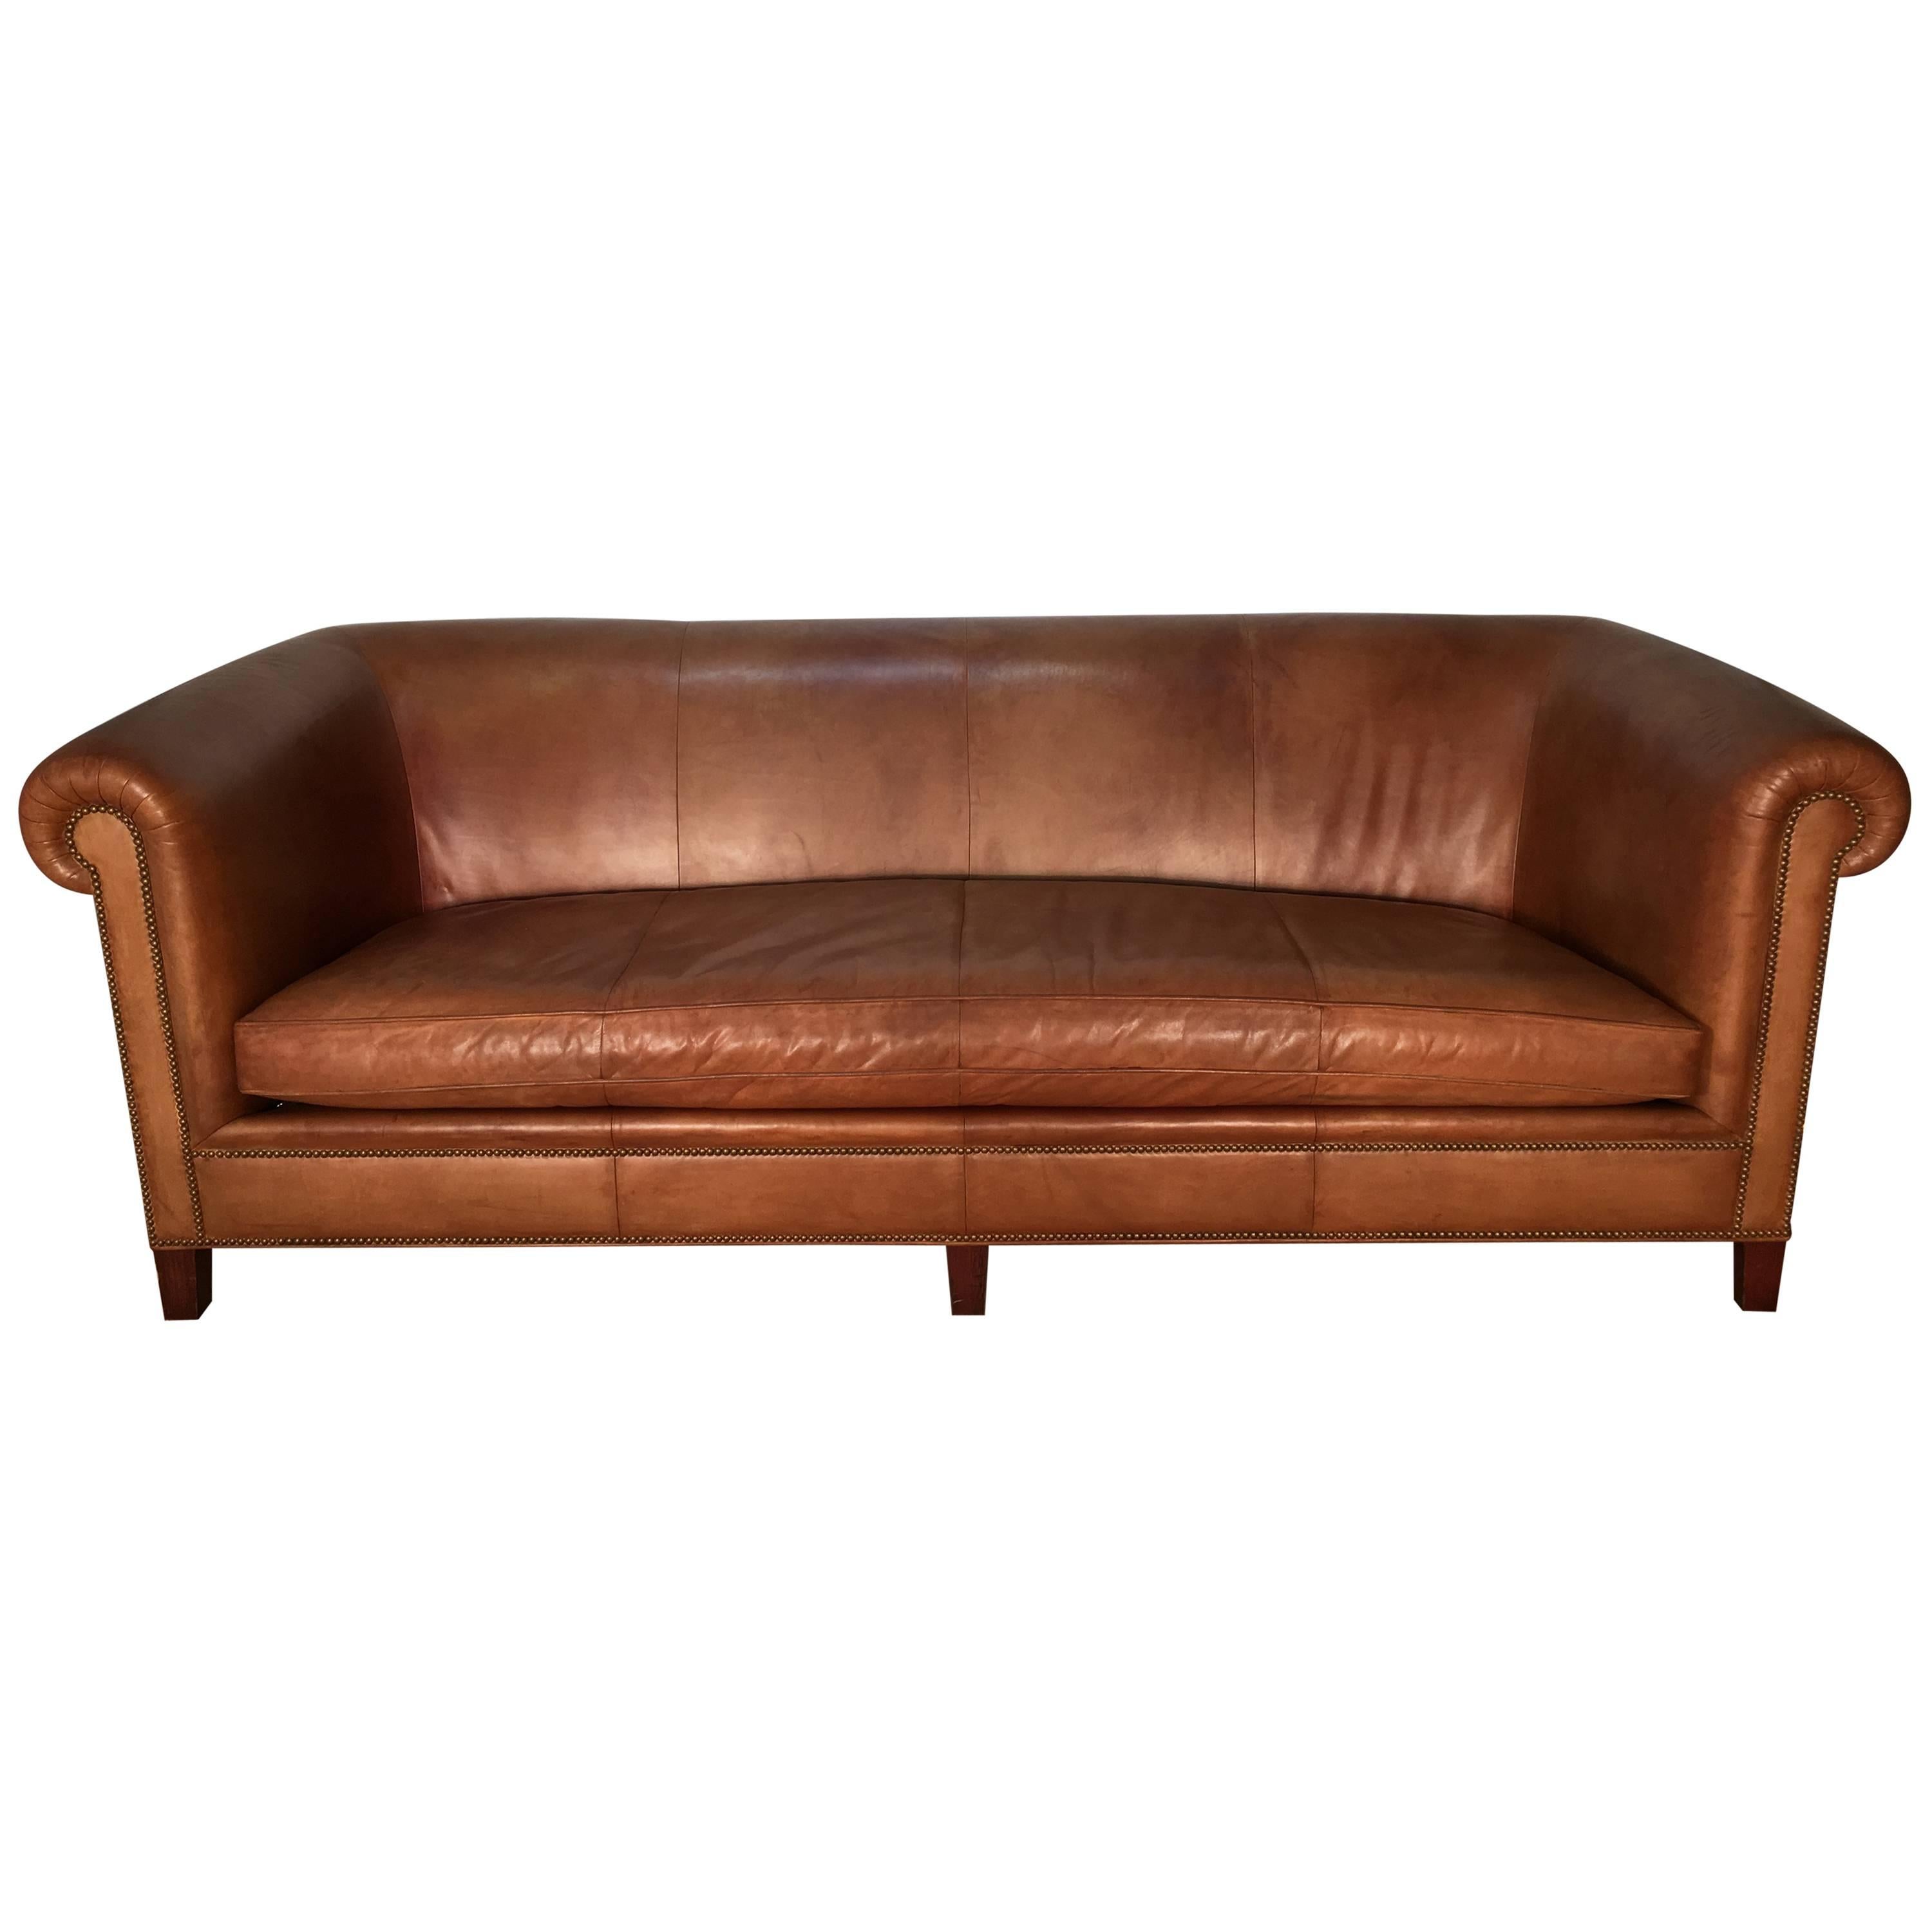 Stunning Saddle Leather English Rolled Arm Chesterfield Sofa